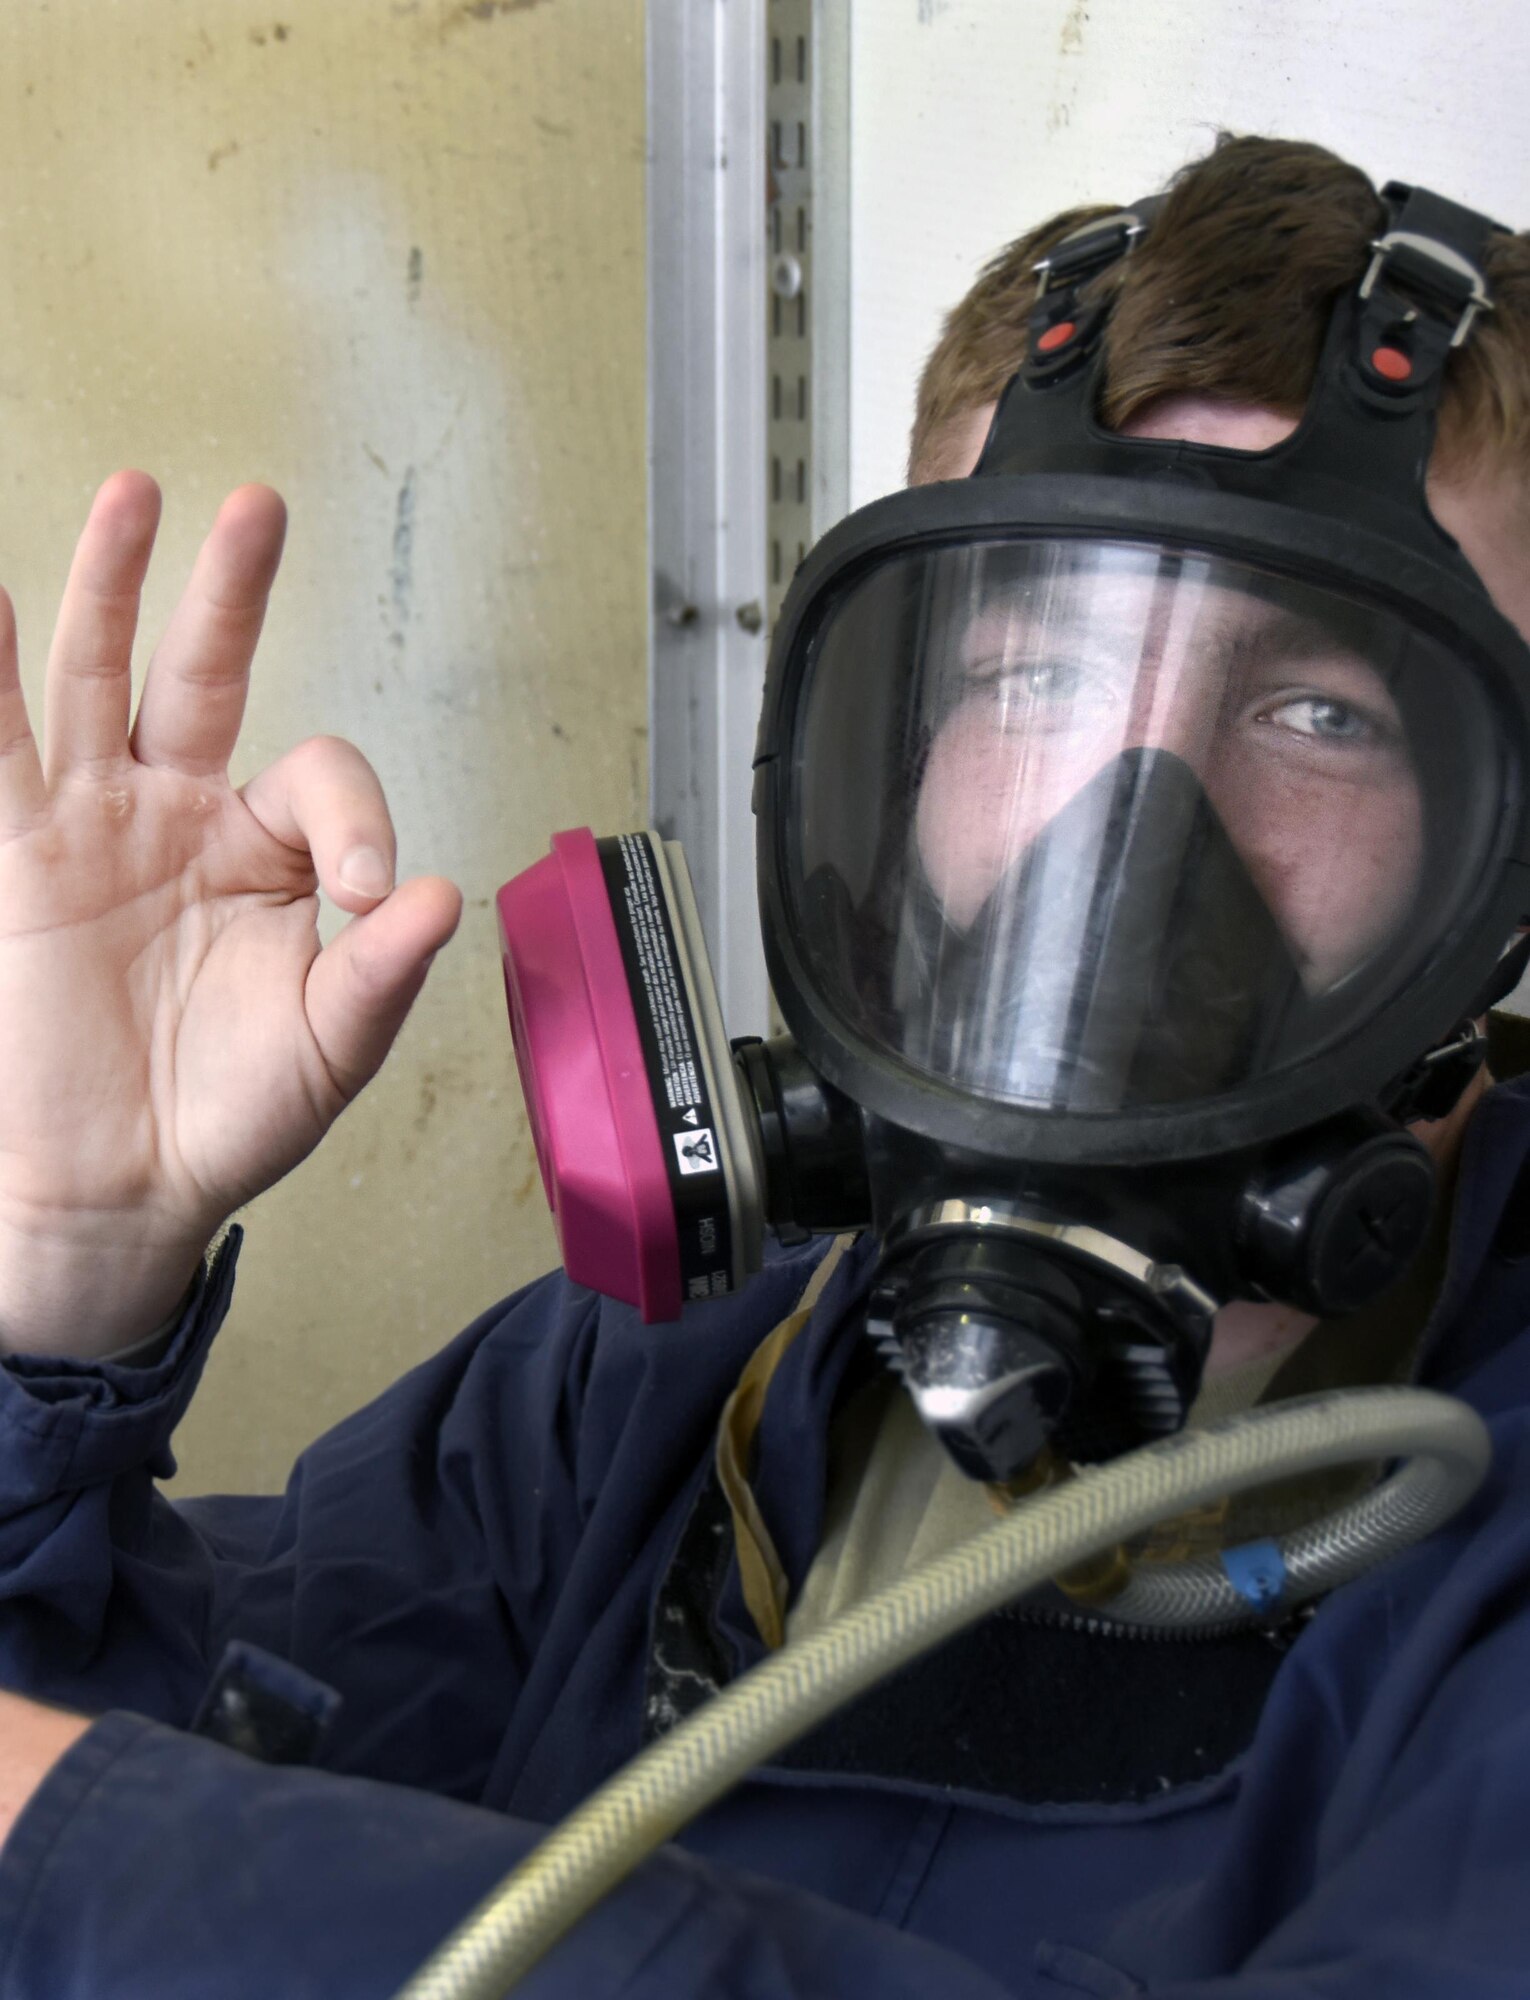 U.S. Air Force Airman 1st Class Austin Milliren, an aircraft fuel systems repair technician with the 379th Expeditionary Maintenance Squadron, signals that he is ready to start his role playing as a trapped technician during a confined space training exercise, April 14, 2017. Given the possible dangers associated with working in a fuel cell, these Airmen counteract the risk by training in realistic scenarios.  (U.S. Air Force photo by Senior Airman Cynthia A. Innocenti)